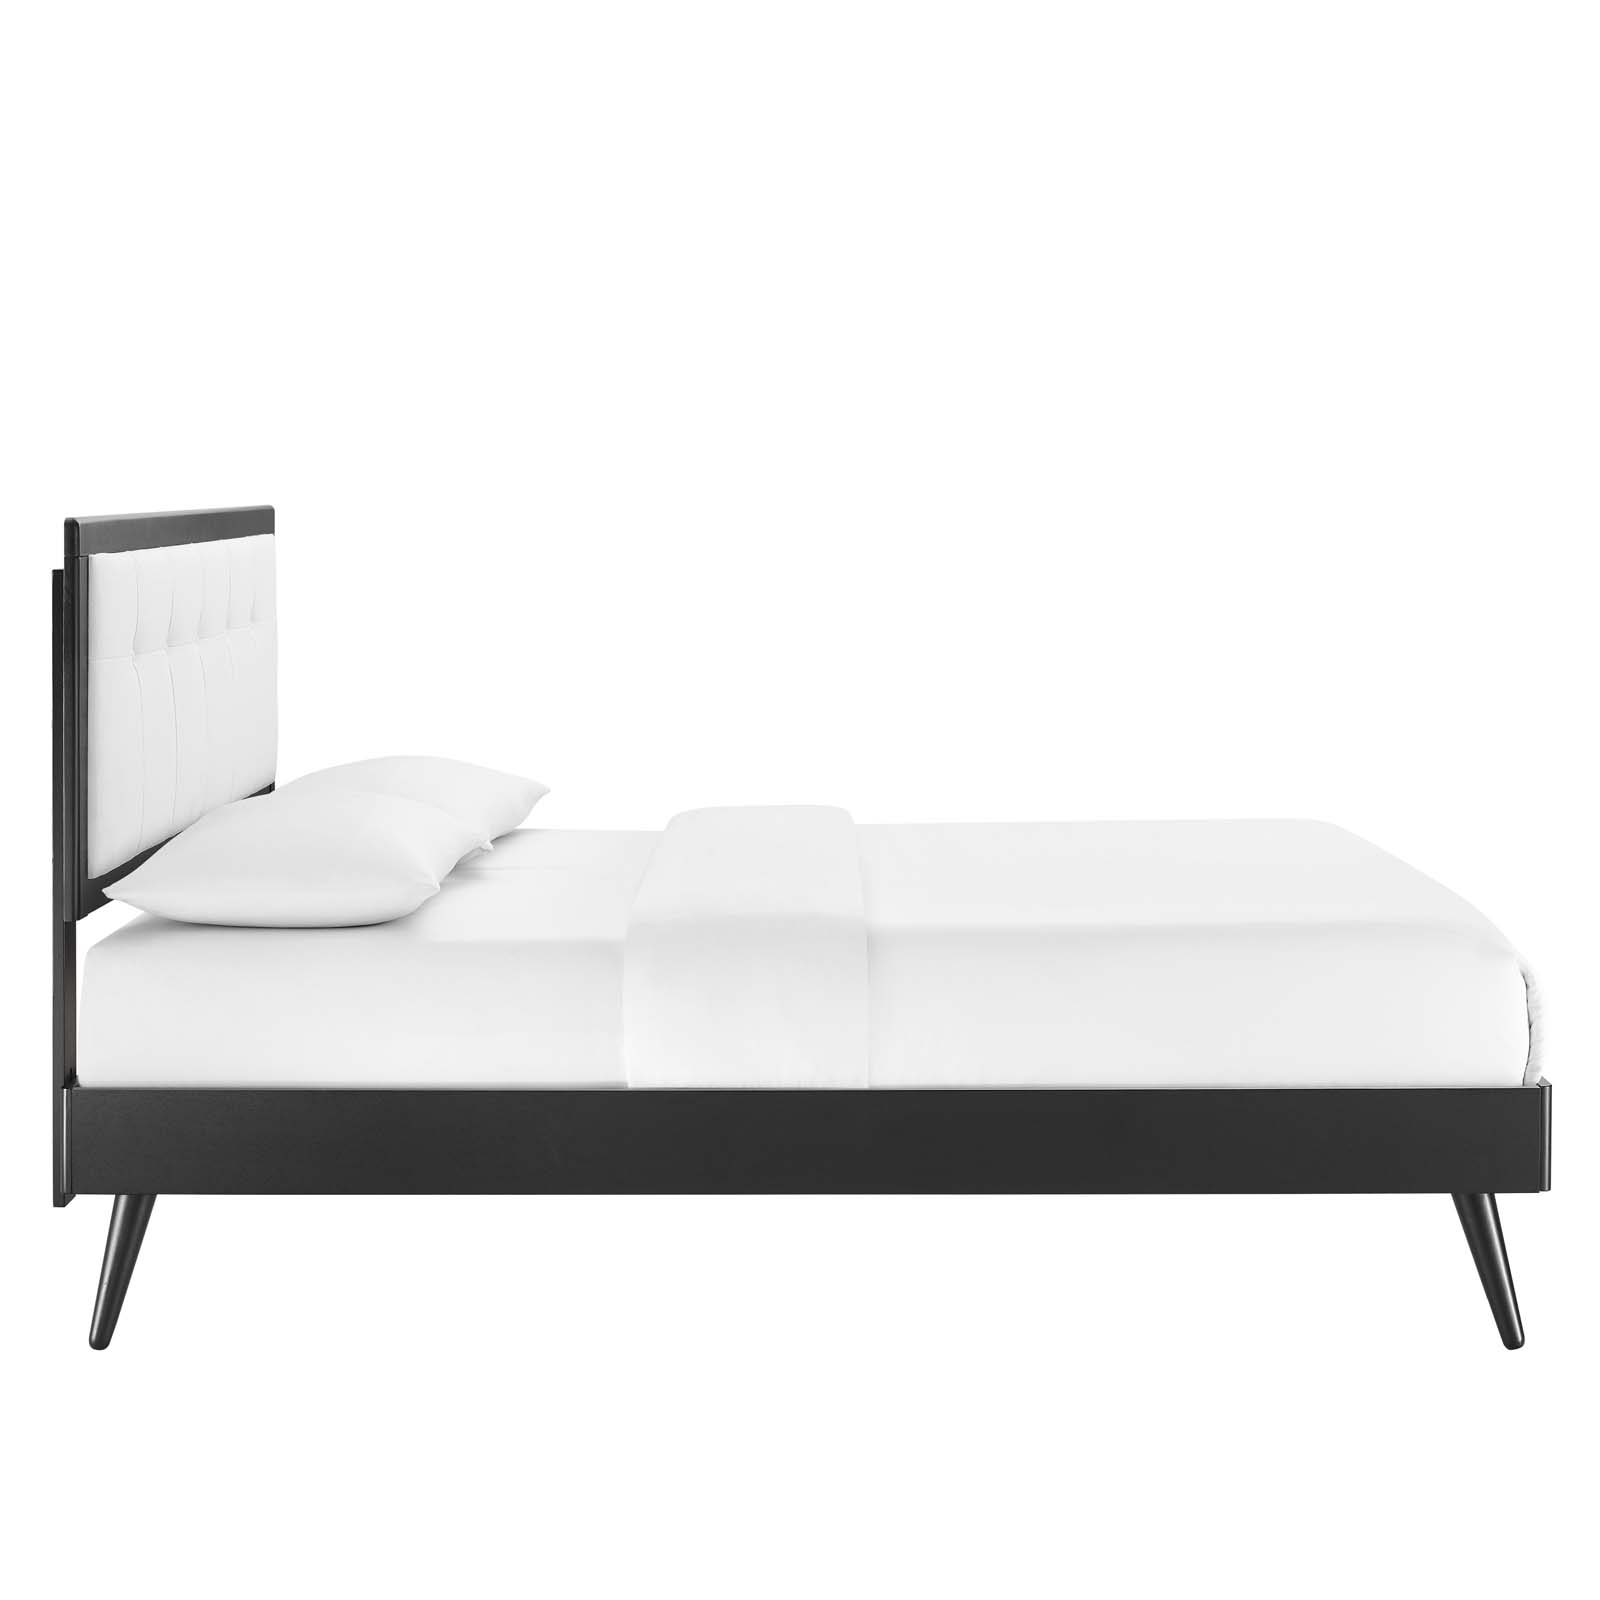 Willow Full Wood Platform Bed With Splayed Legs, Black White